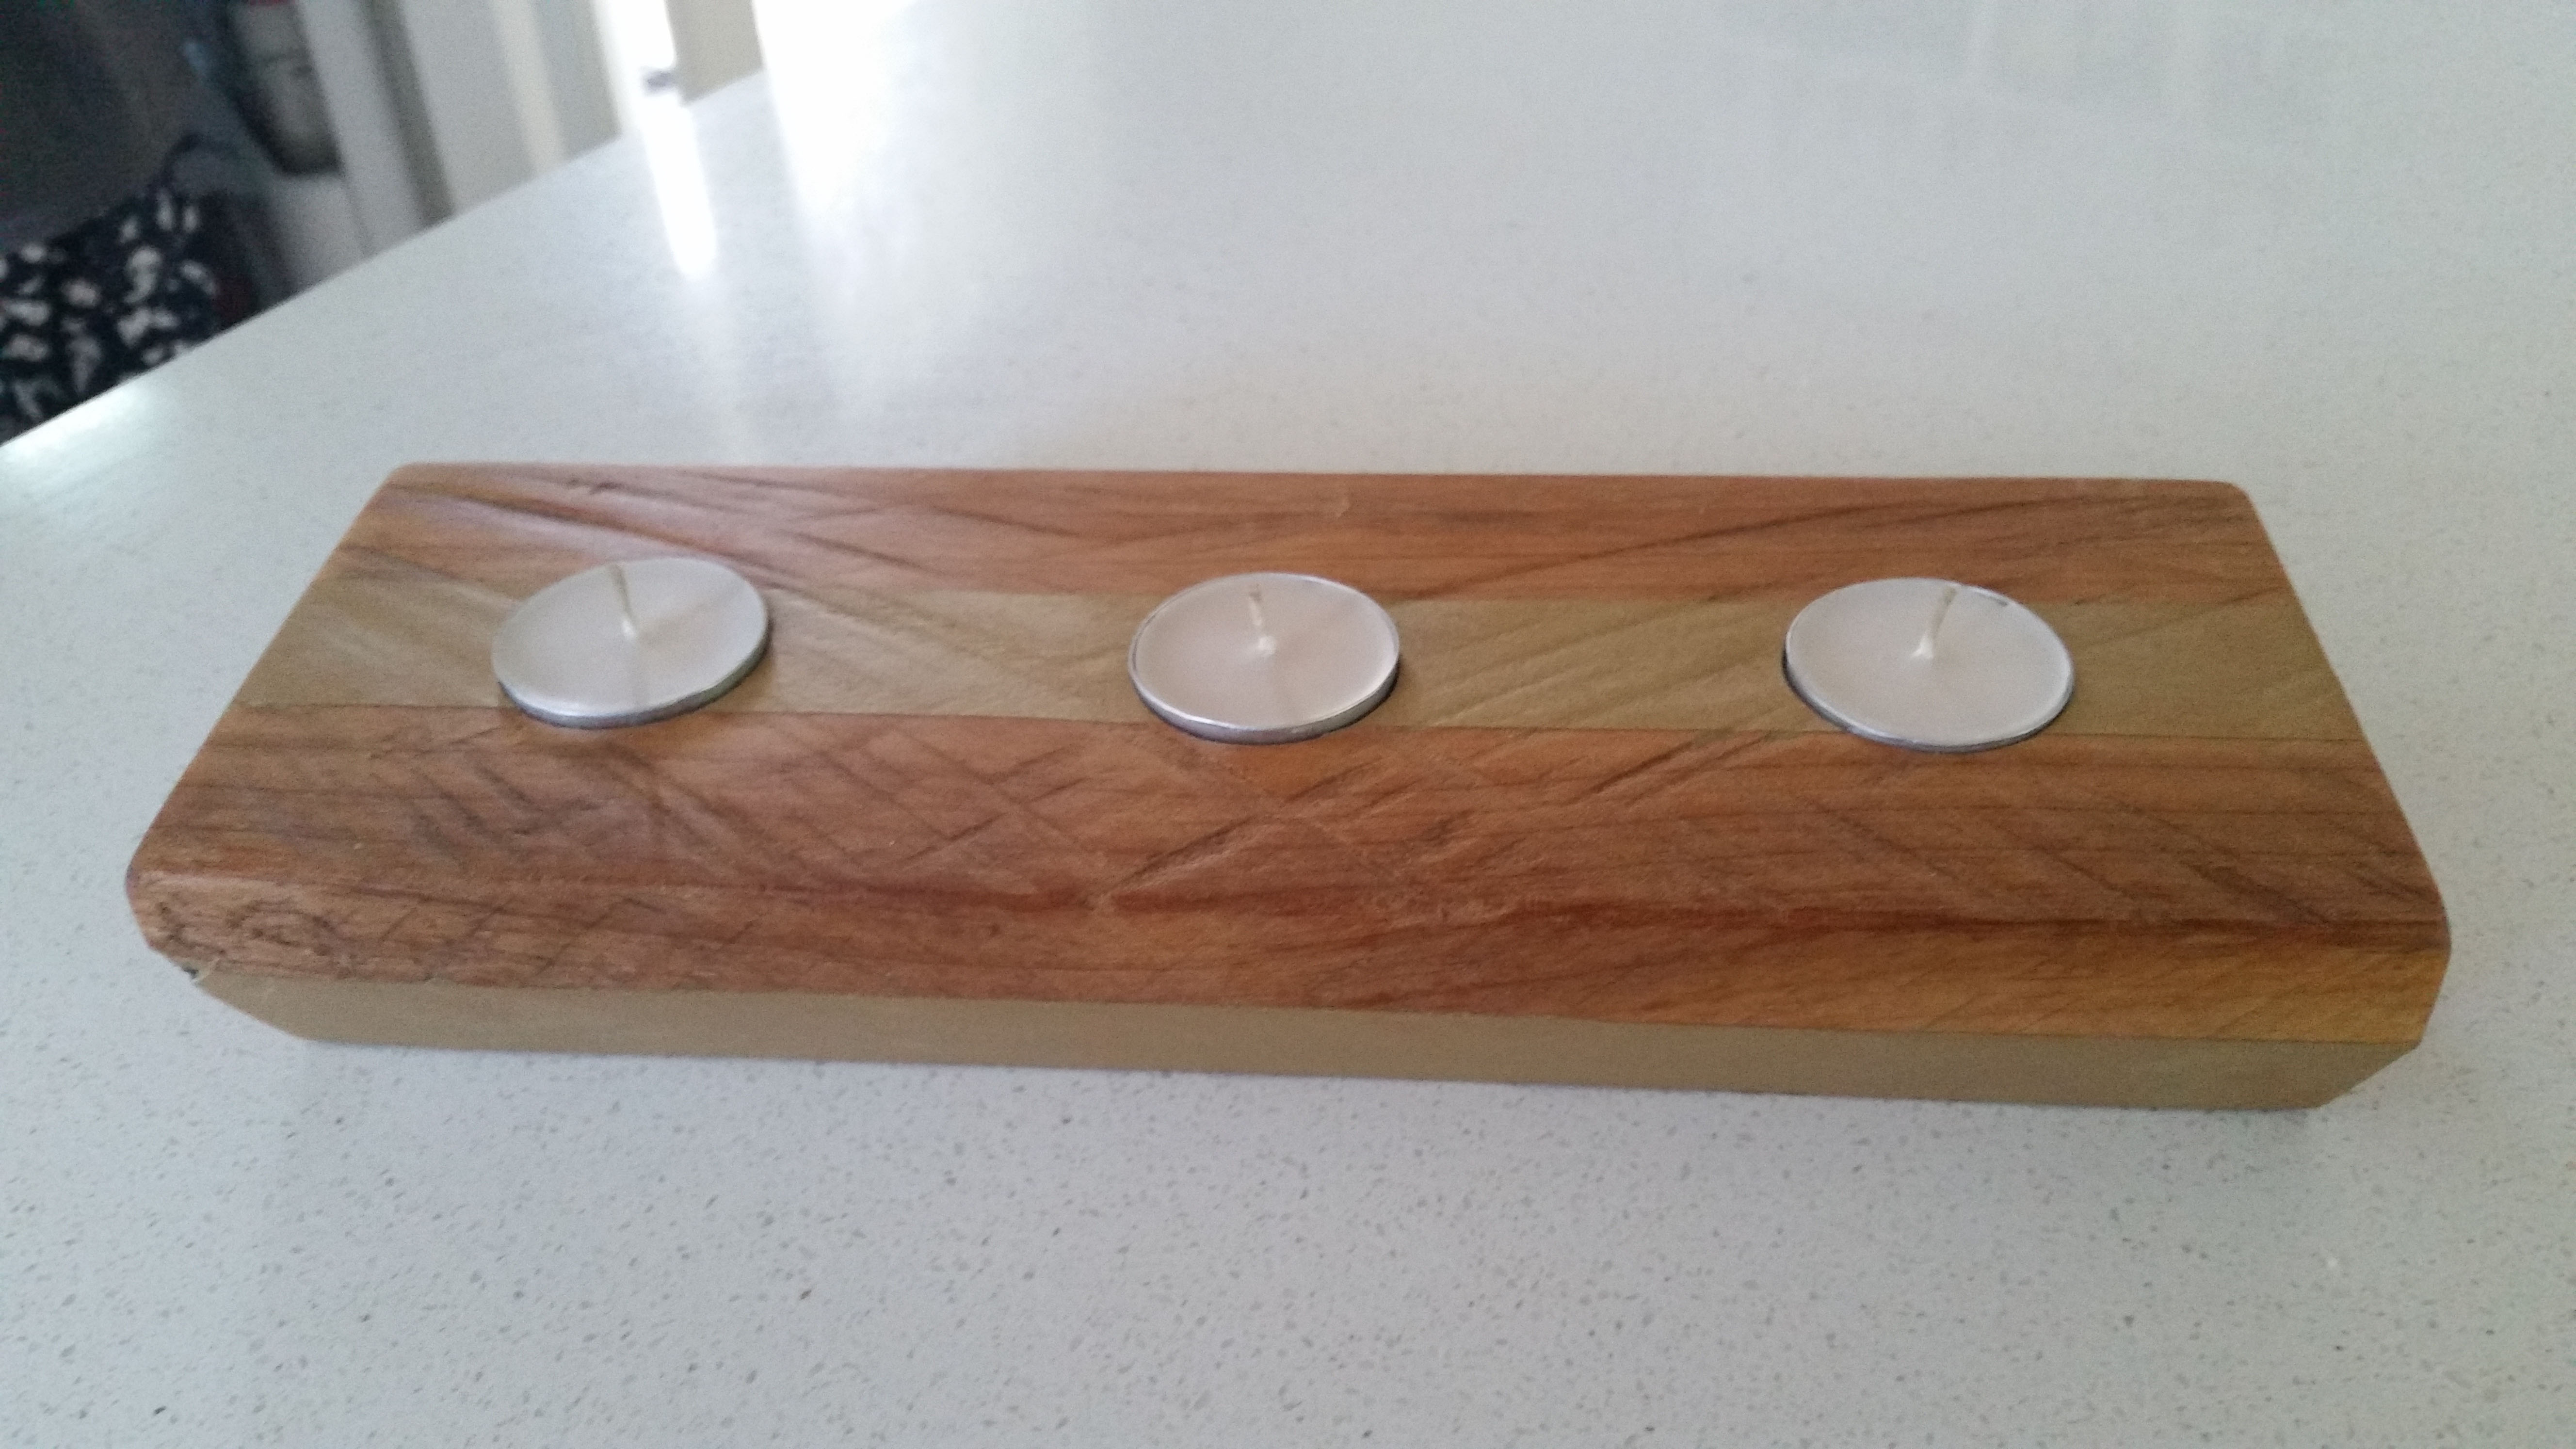 3 candle holder